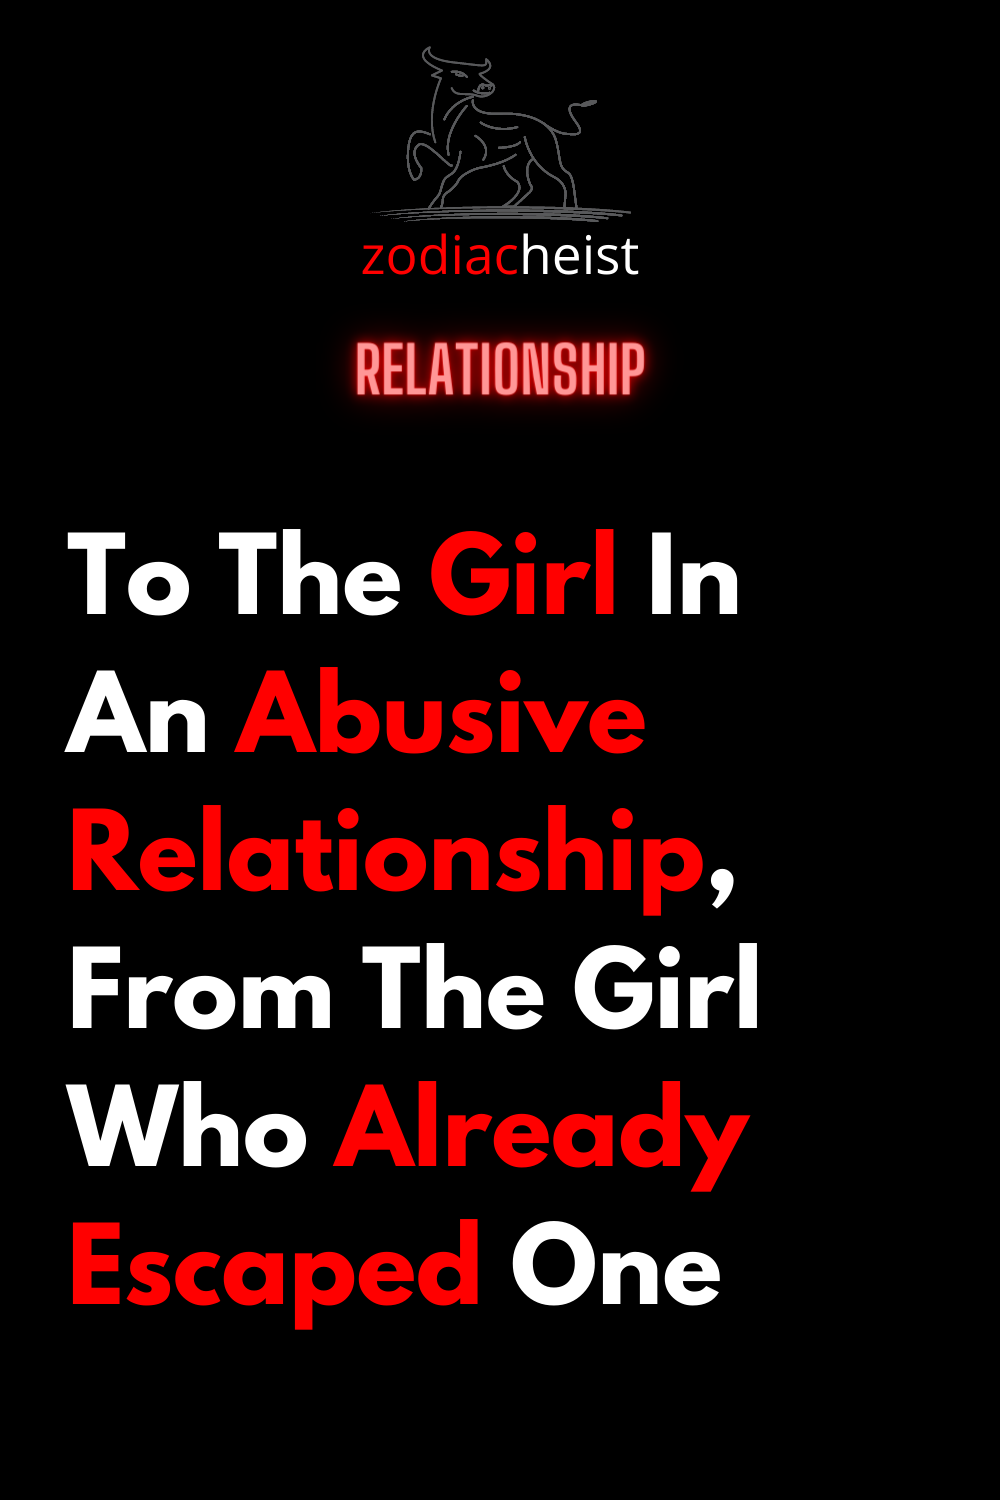 To The Girl In An Abusive Relationship, From The Girl Who Already Escaped One